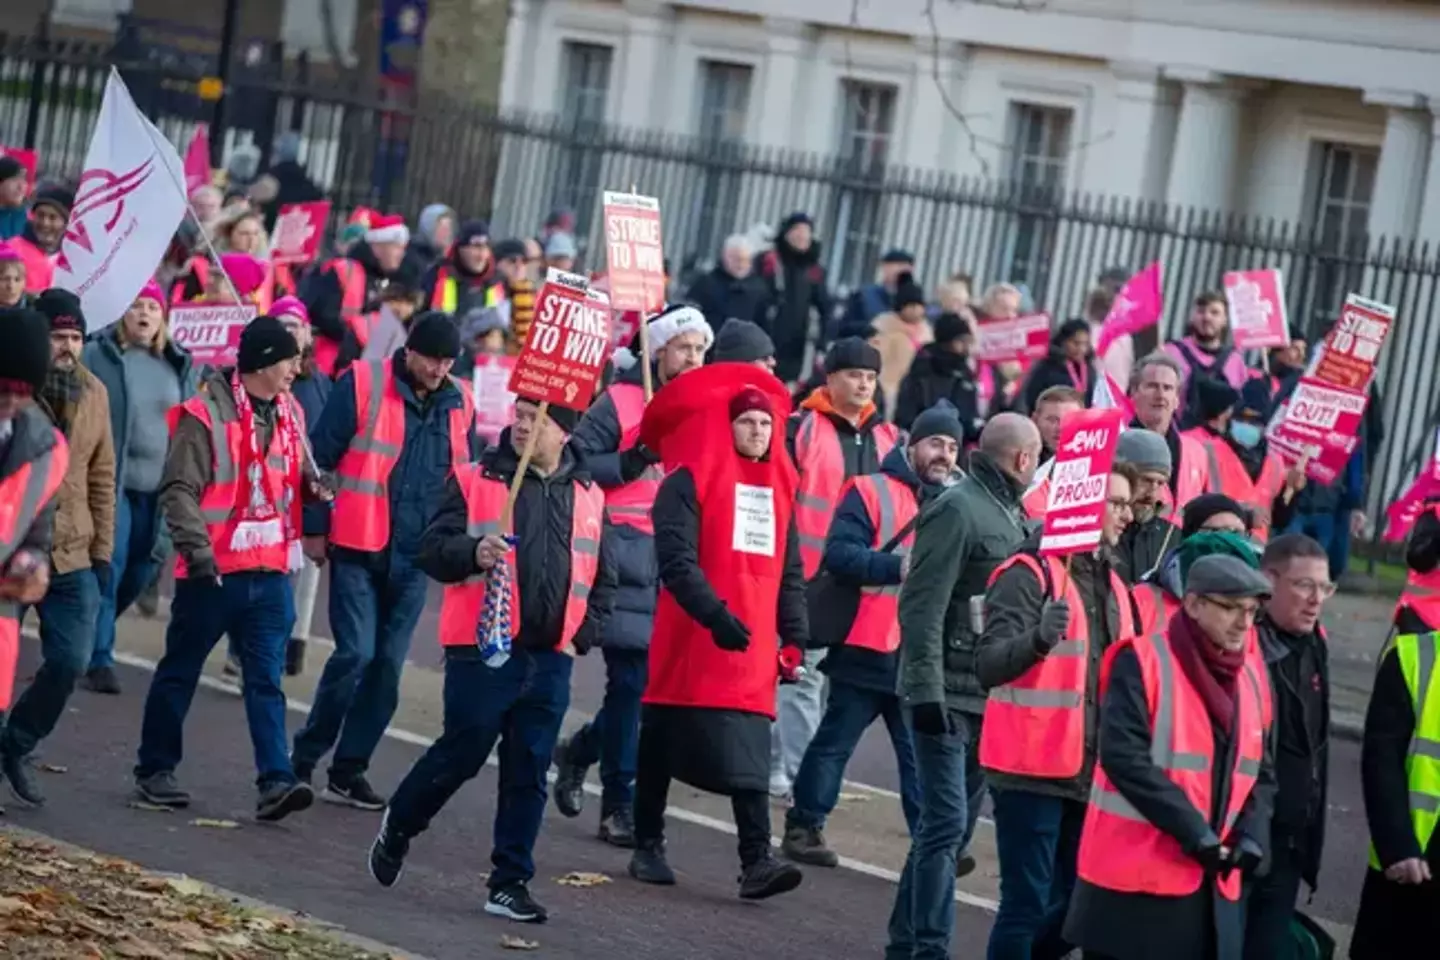 Royal Mail workers have been on strike this month.